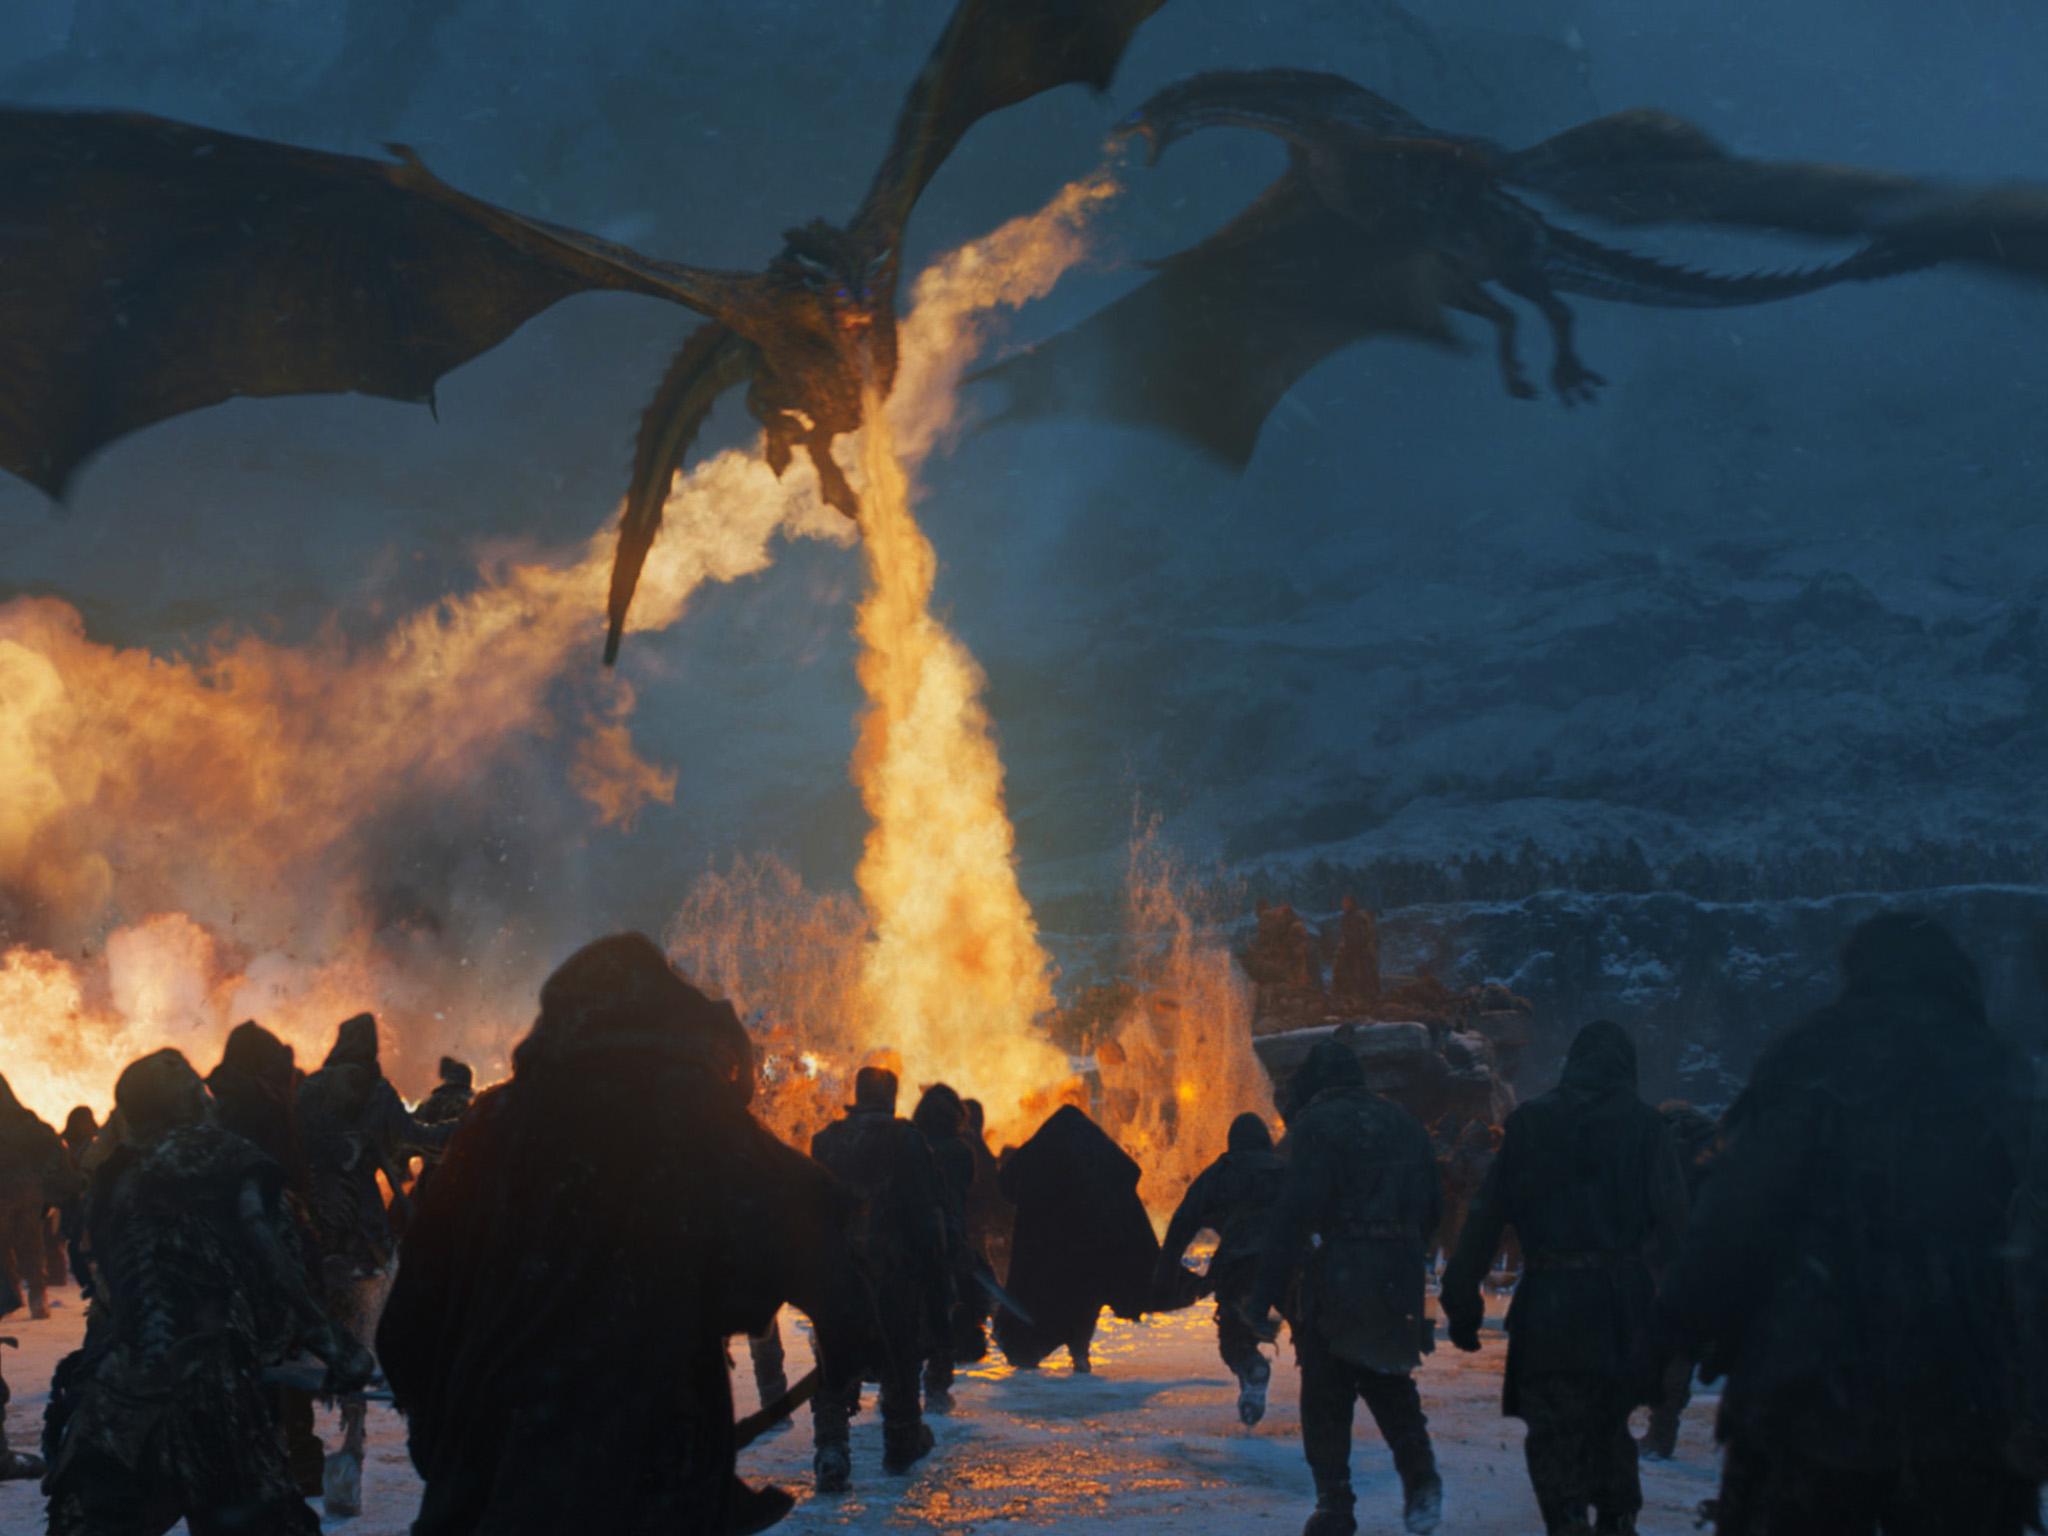 Game of Thrones: in the end, size mattered